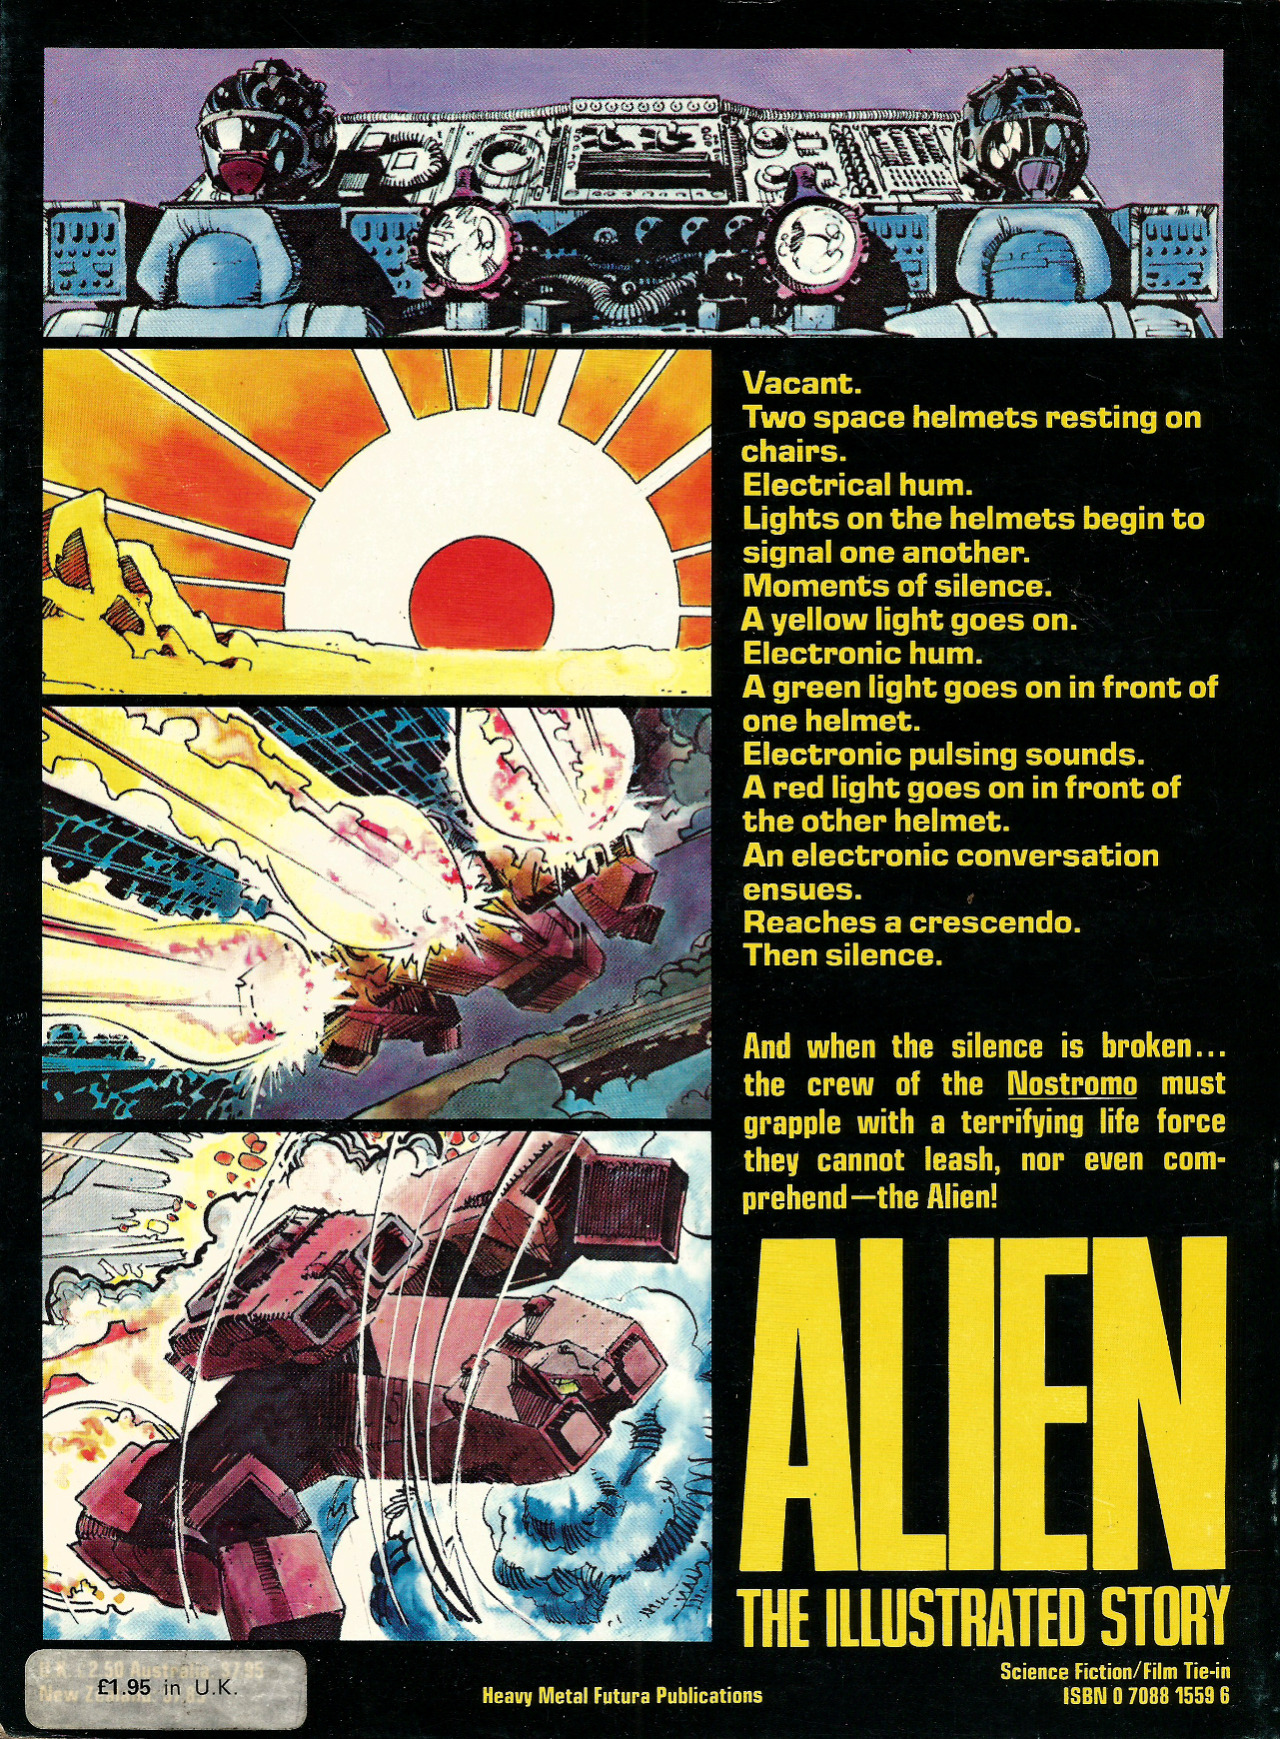 Alien: The Illustrated Story, by Archie Goodwin and Walter Simonson (Futura, 1979).From